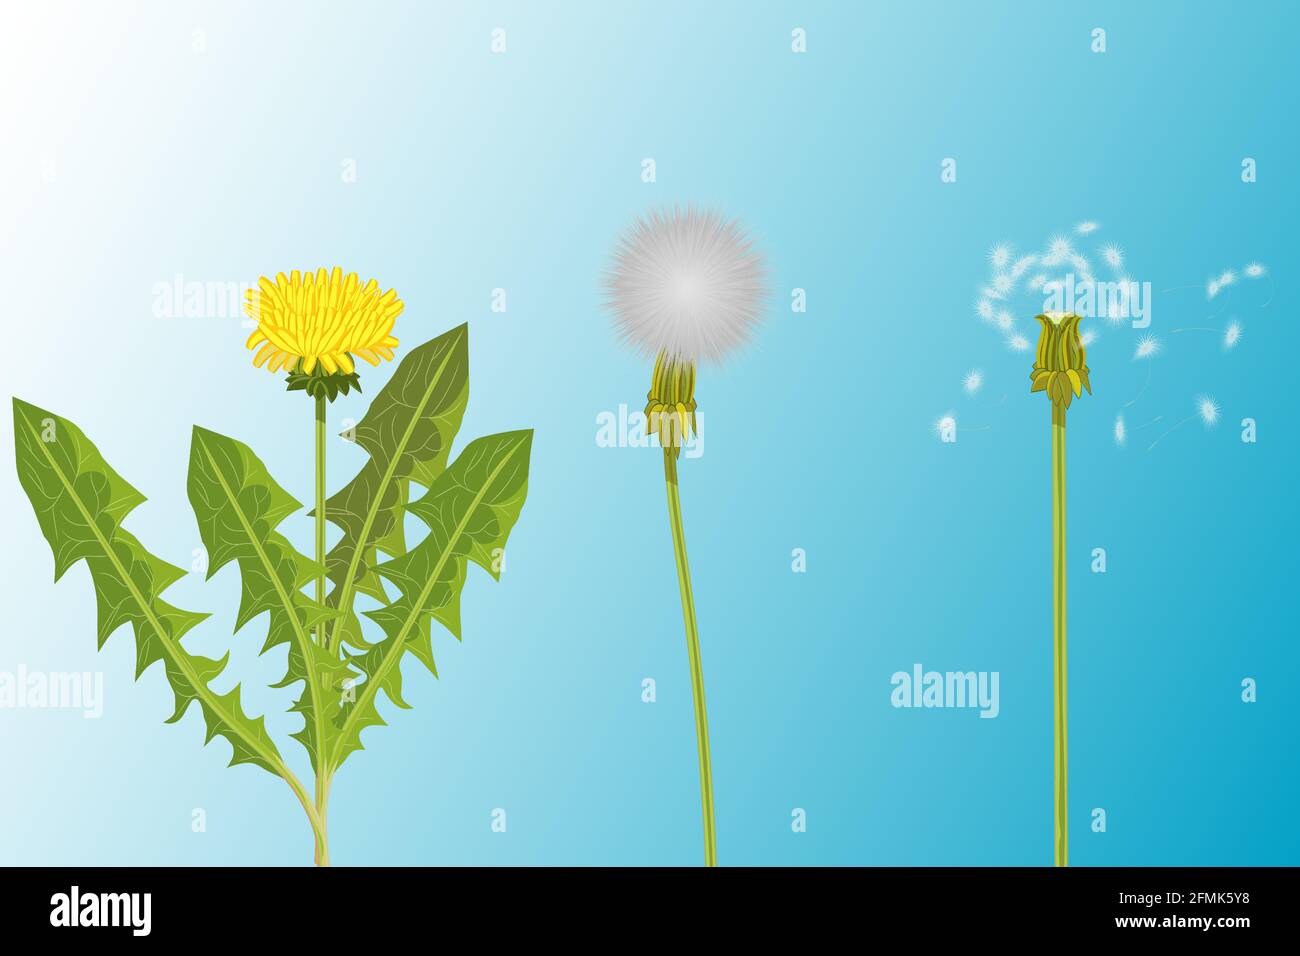 Vector illustration of 3 realistic variety of dandelions - young with fresh yellow flower and green leaves, white fluffy dandelion and last one with Stock Vector